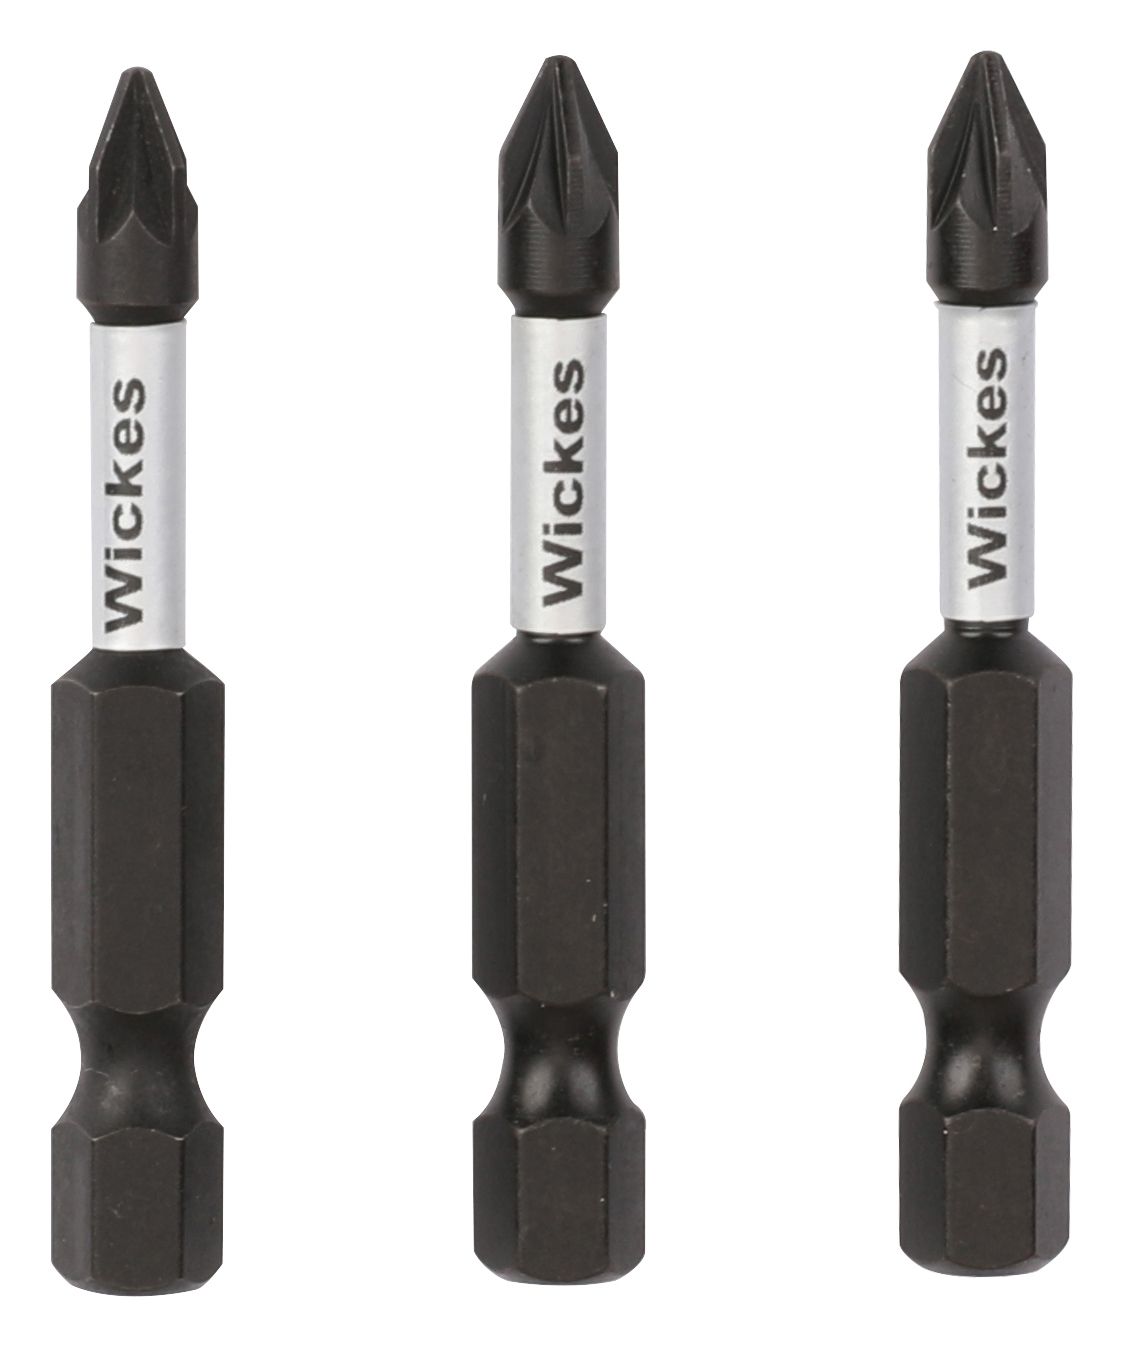 Image of Wickes Impact Screwdriver Bit PZ1 - 50mm - Pack of 3